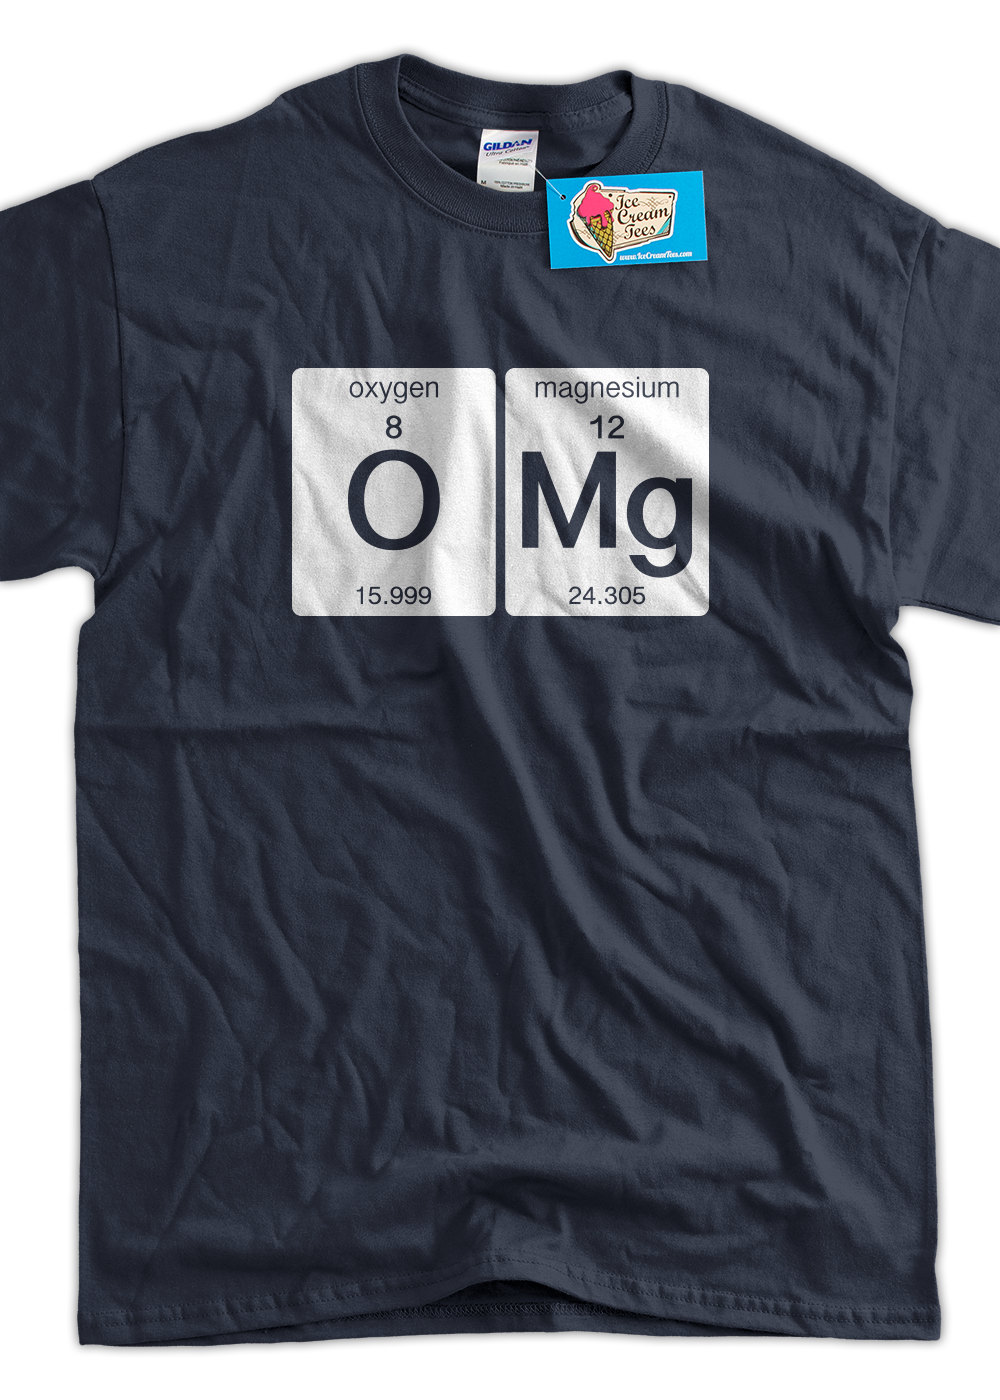 funny science t shirts